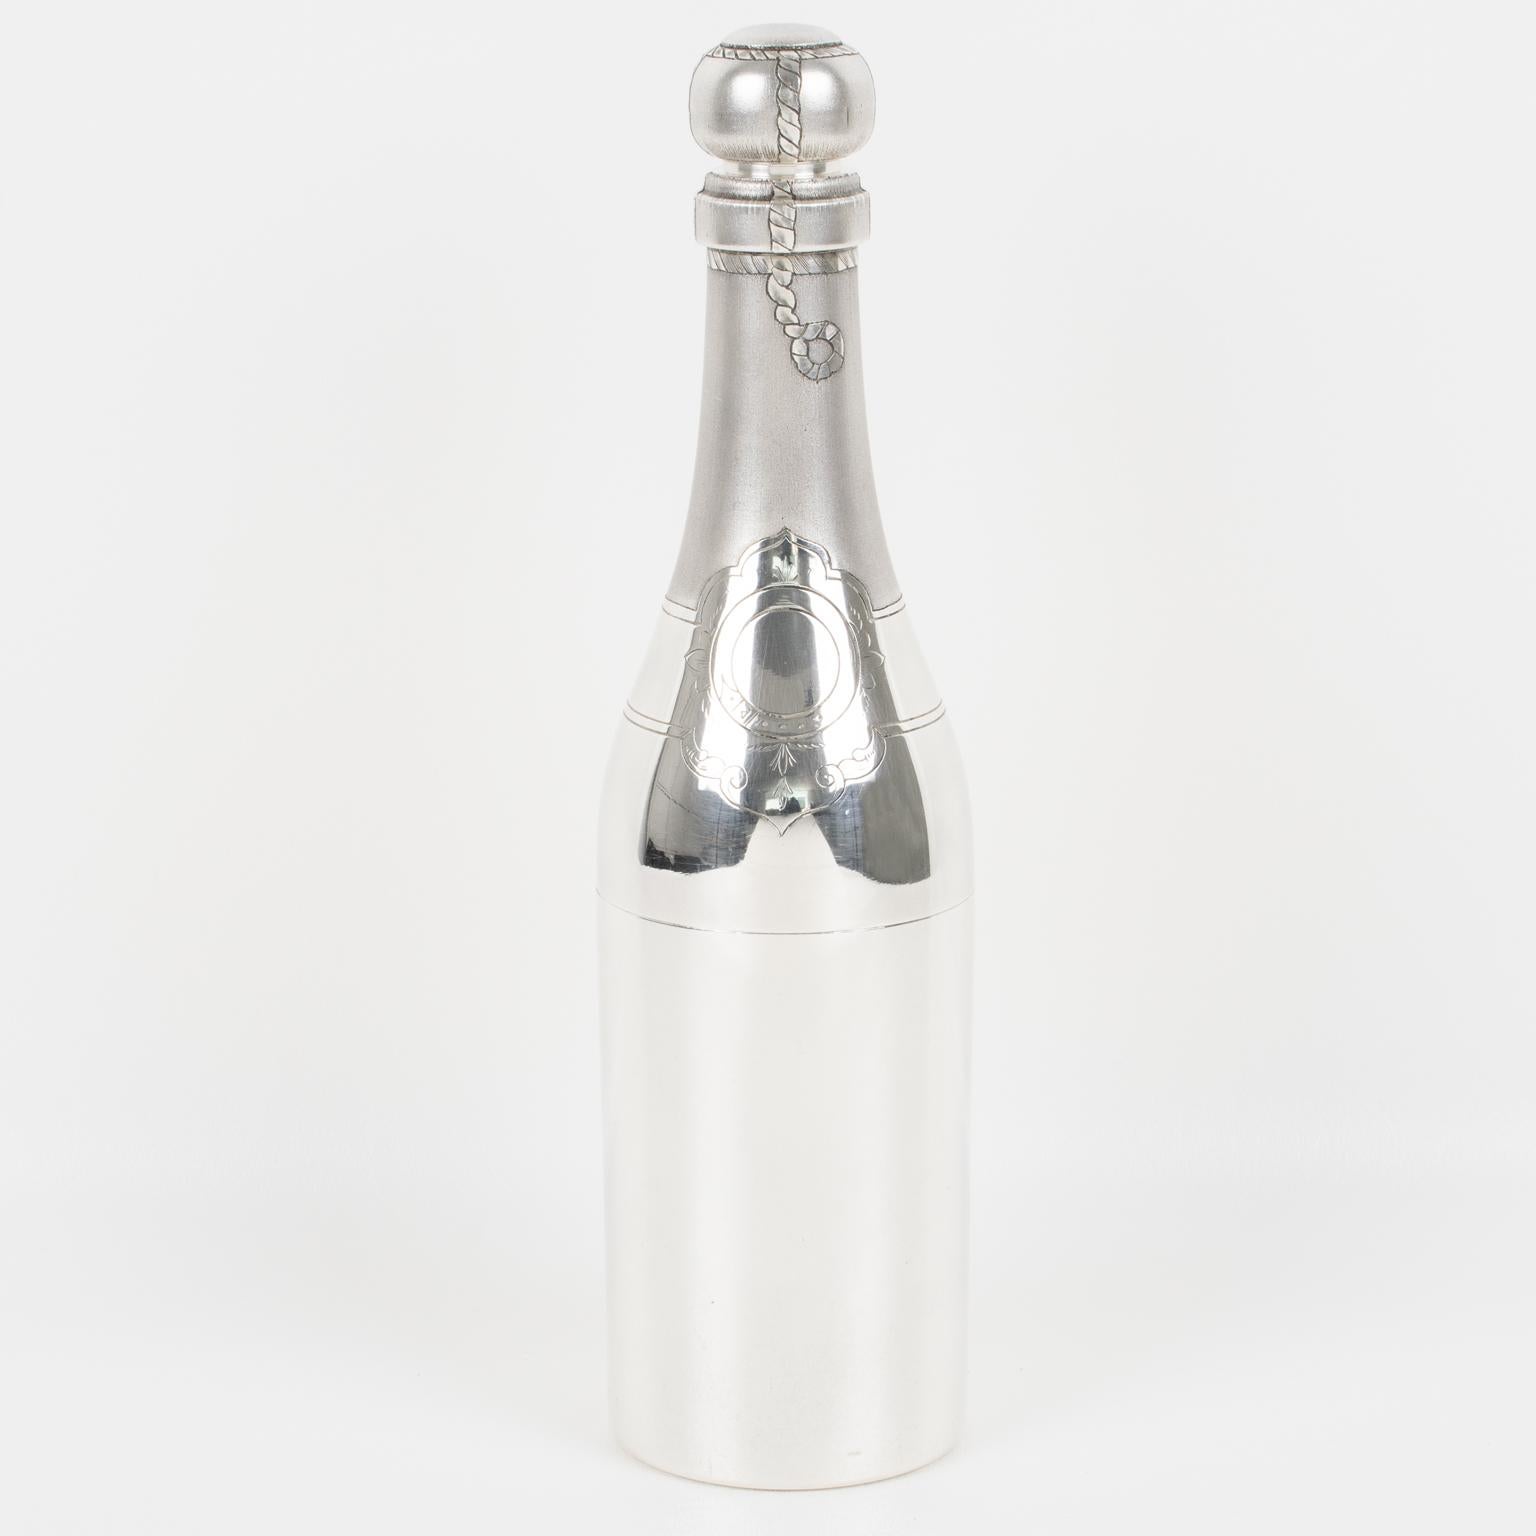 A stunning French Art Deco silver plate cocktail or Martini shaker with a champagne bottle shape designed by silversmith Vautrain, Paris. A tall champagne bottle shape with detailed and refined engraving. Three-sectioned designed cocktail shaker